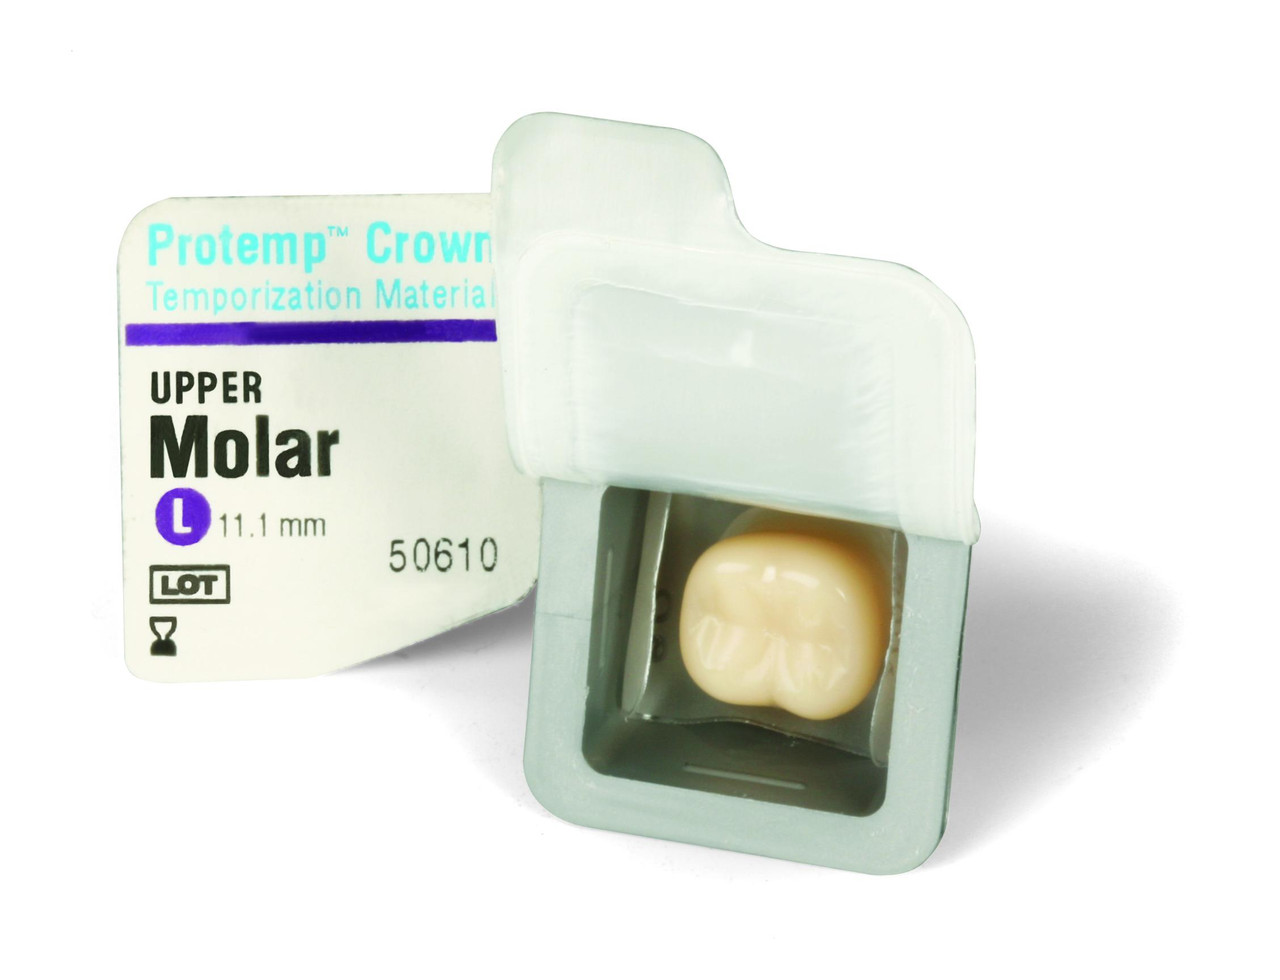 3M Protemp Crown Temporization Material, 50610, Molar Upper, Large, 5Crowns